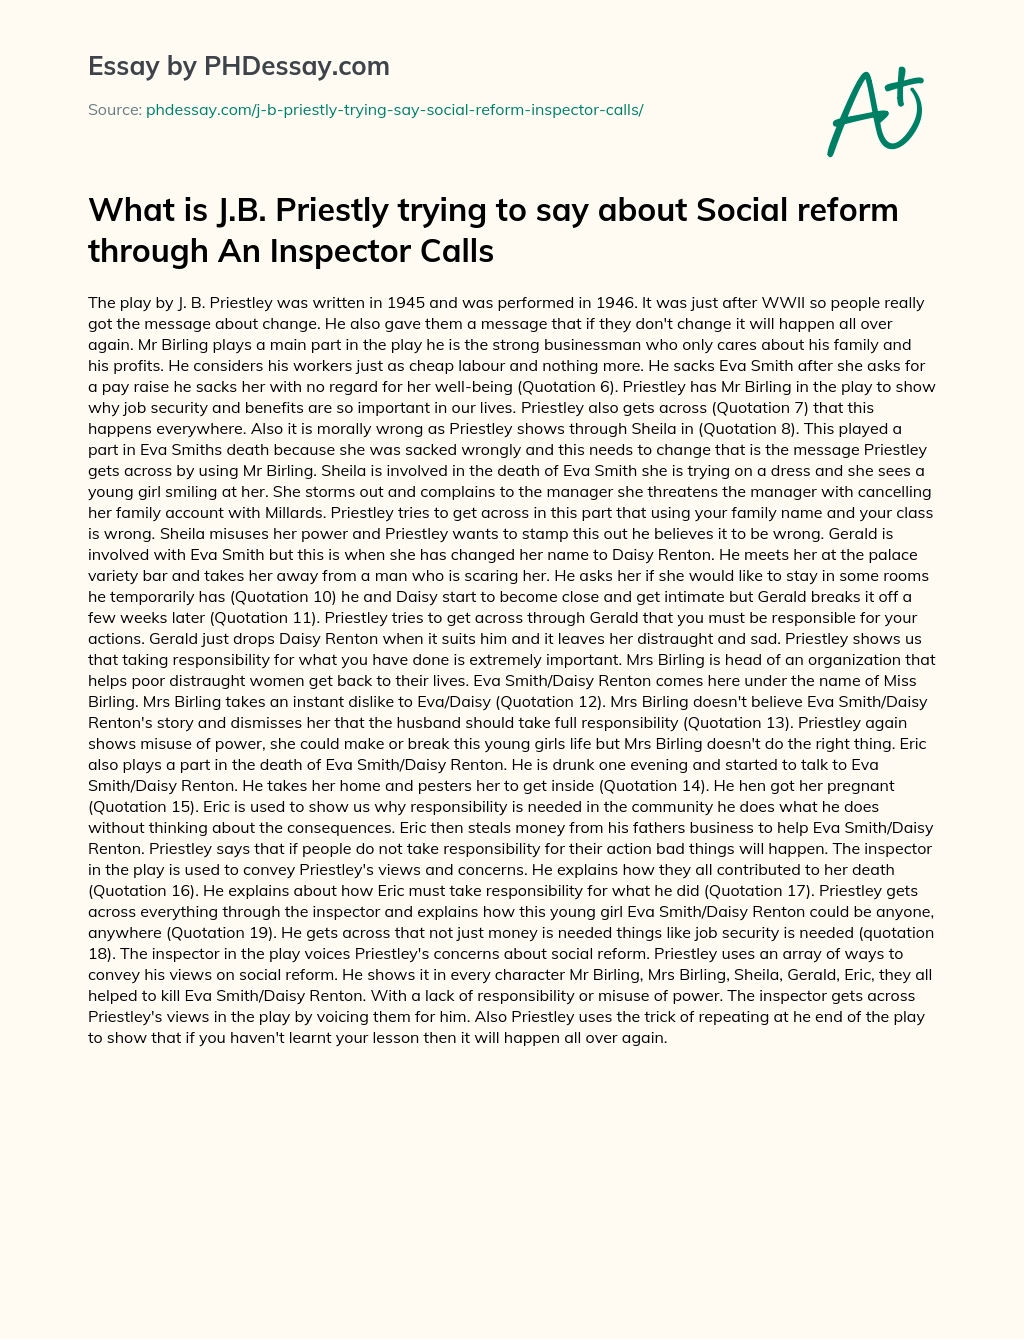 What is J.B. Priestly trying to say about Social reform through An Inspector Calls essay